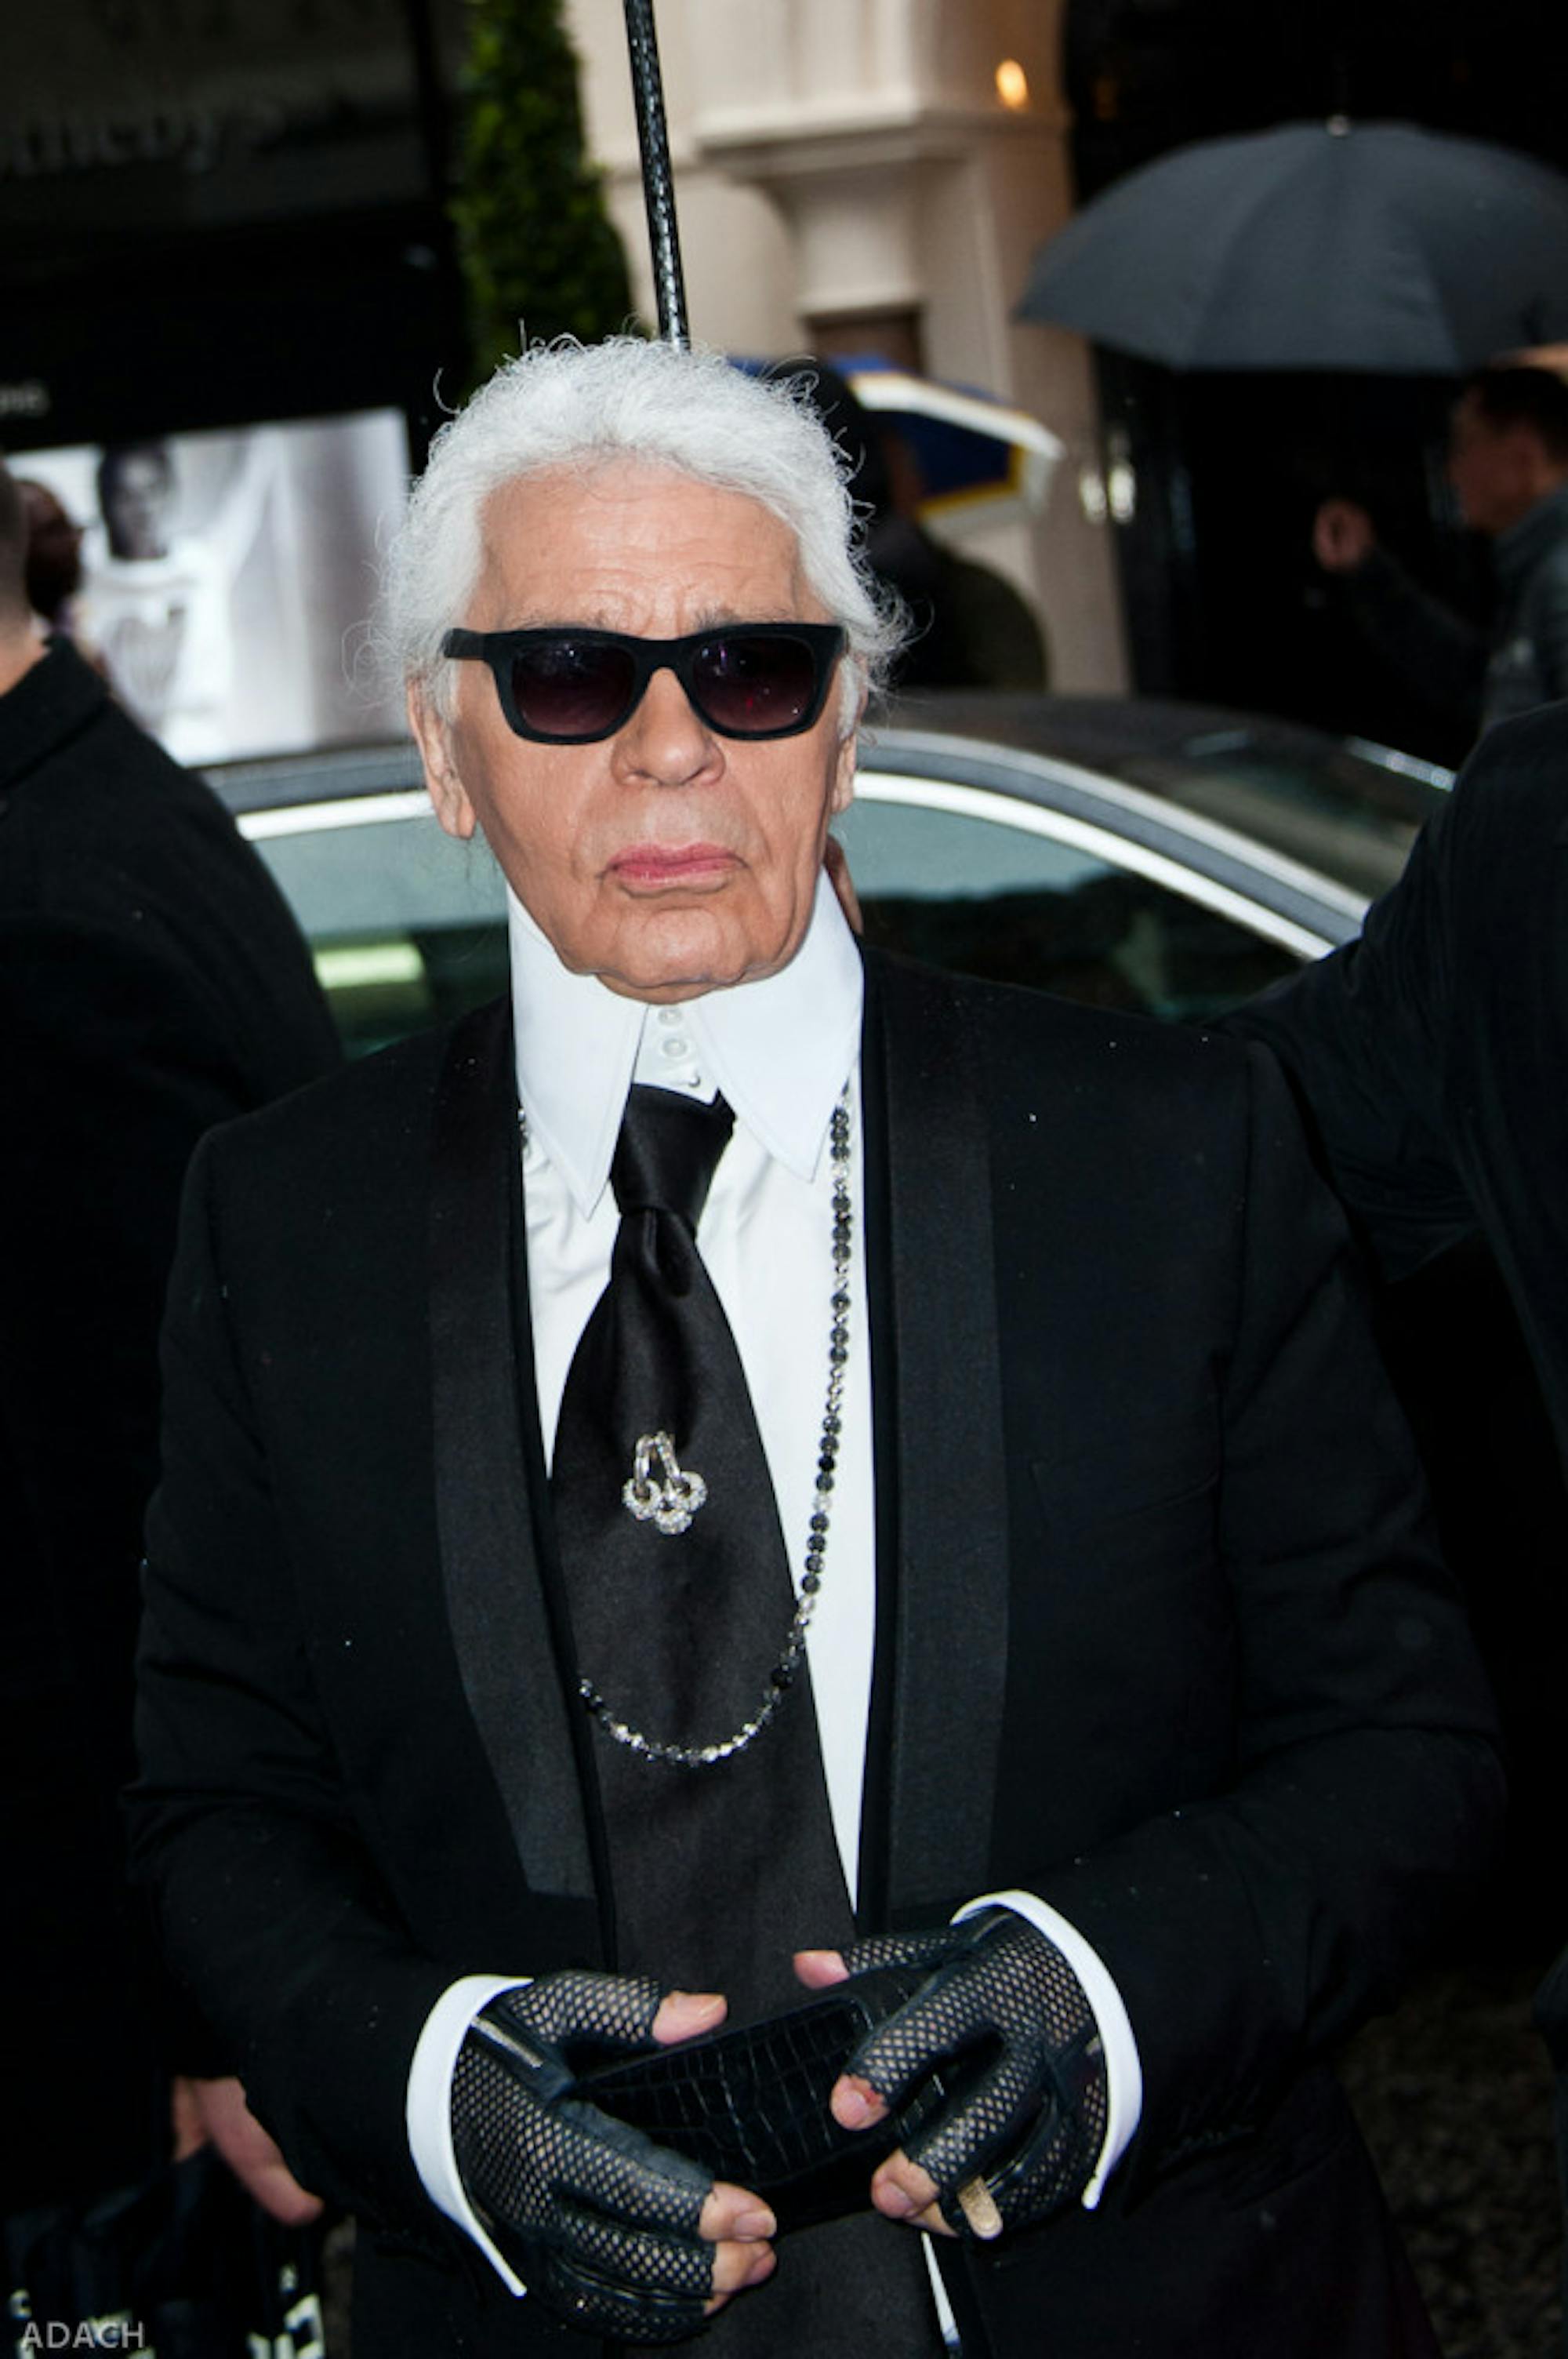 Fashion mourns death of the Kaiser Karl Lagerfeld